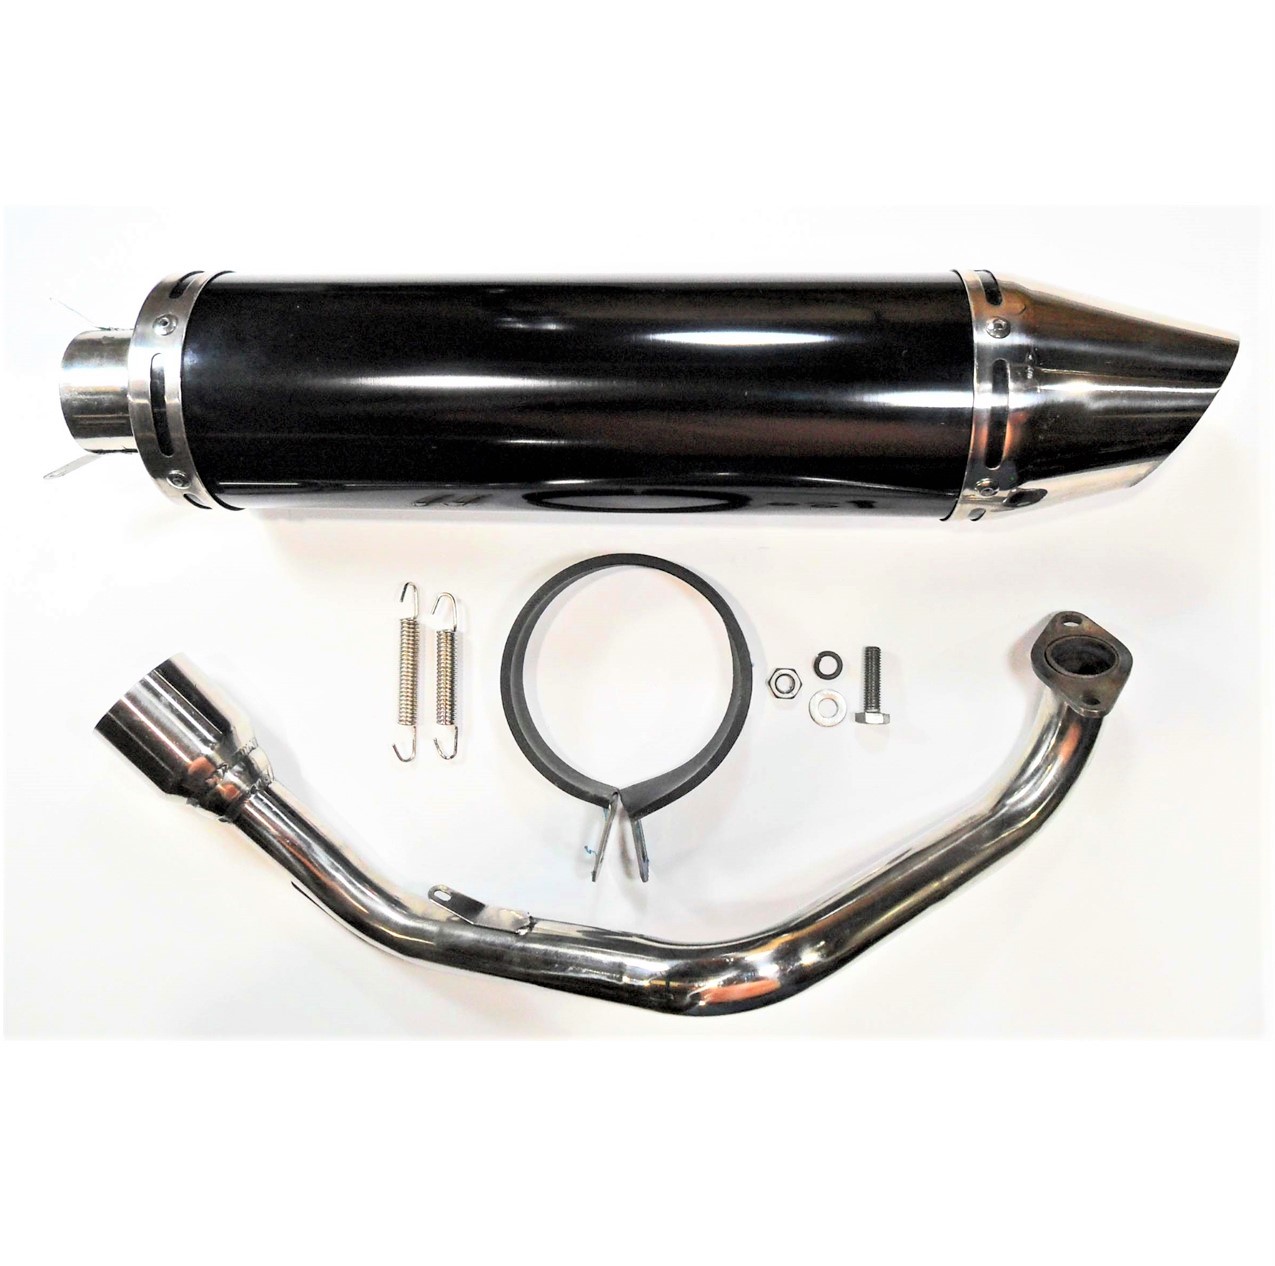 Exhaust Pipe HIGH PERFORMANCE - BLACK/CHROME Fits Most GY6-125, GY6-150 Chinese Scooters Canister Length (including tip)=17 1/4" Canister Diameter=4" - Click Image to Close